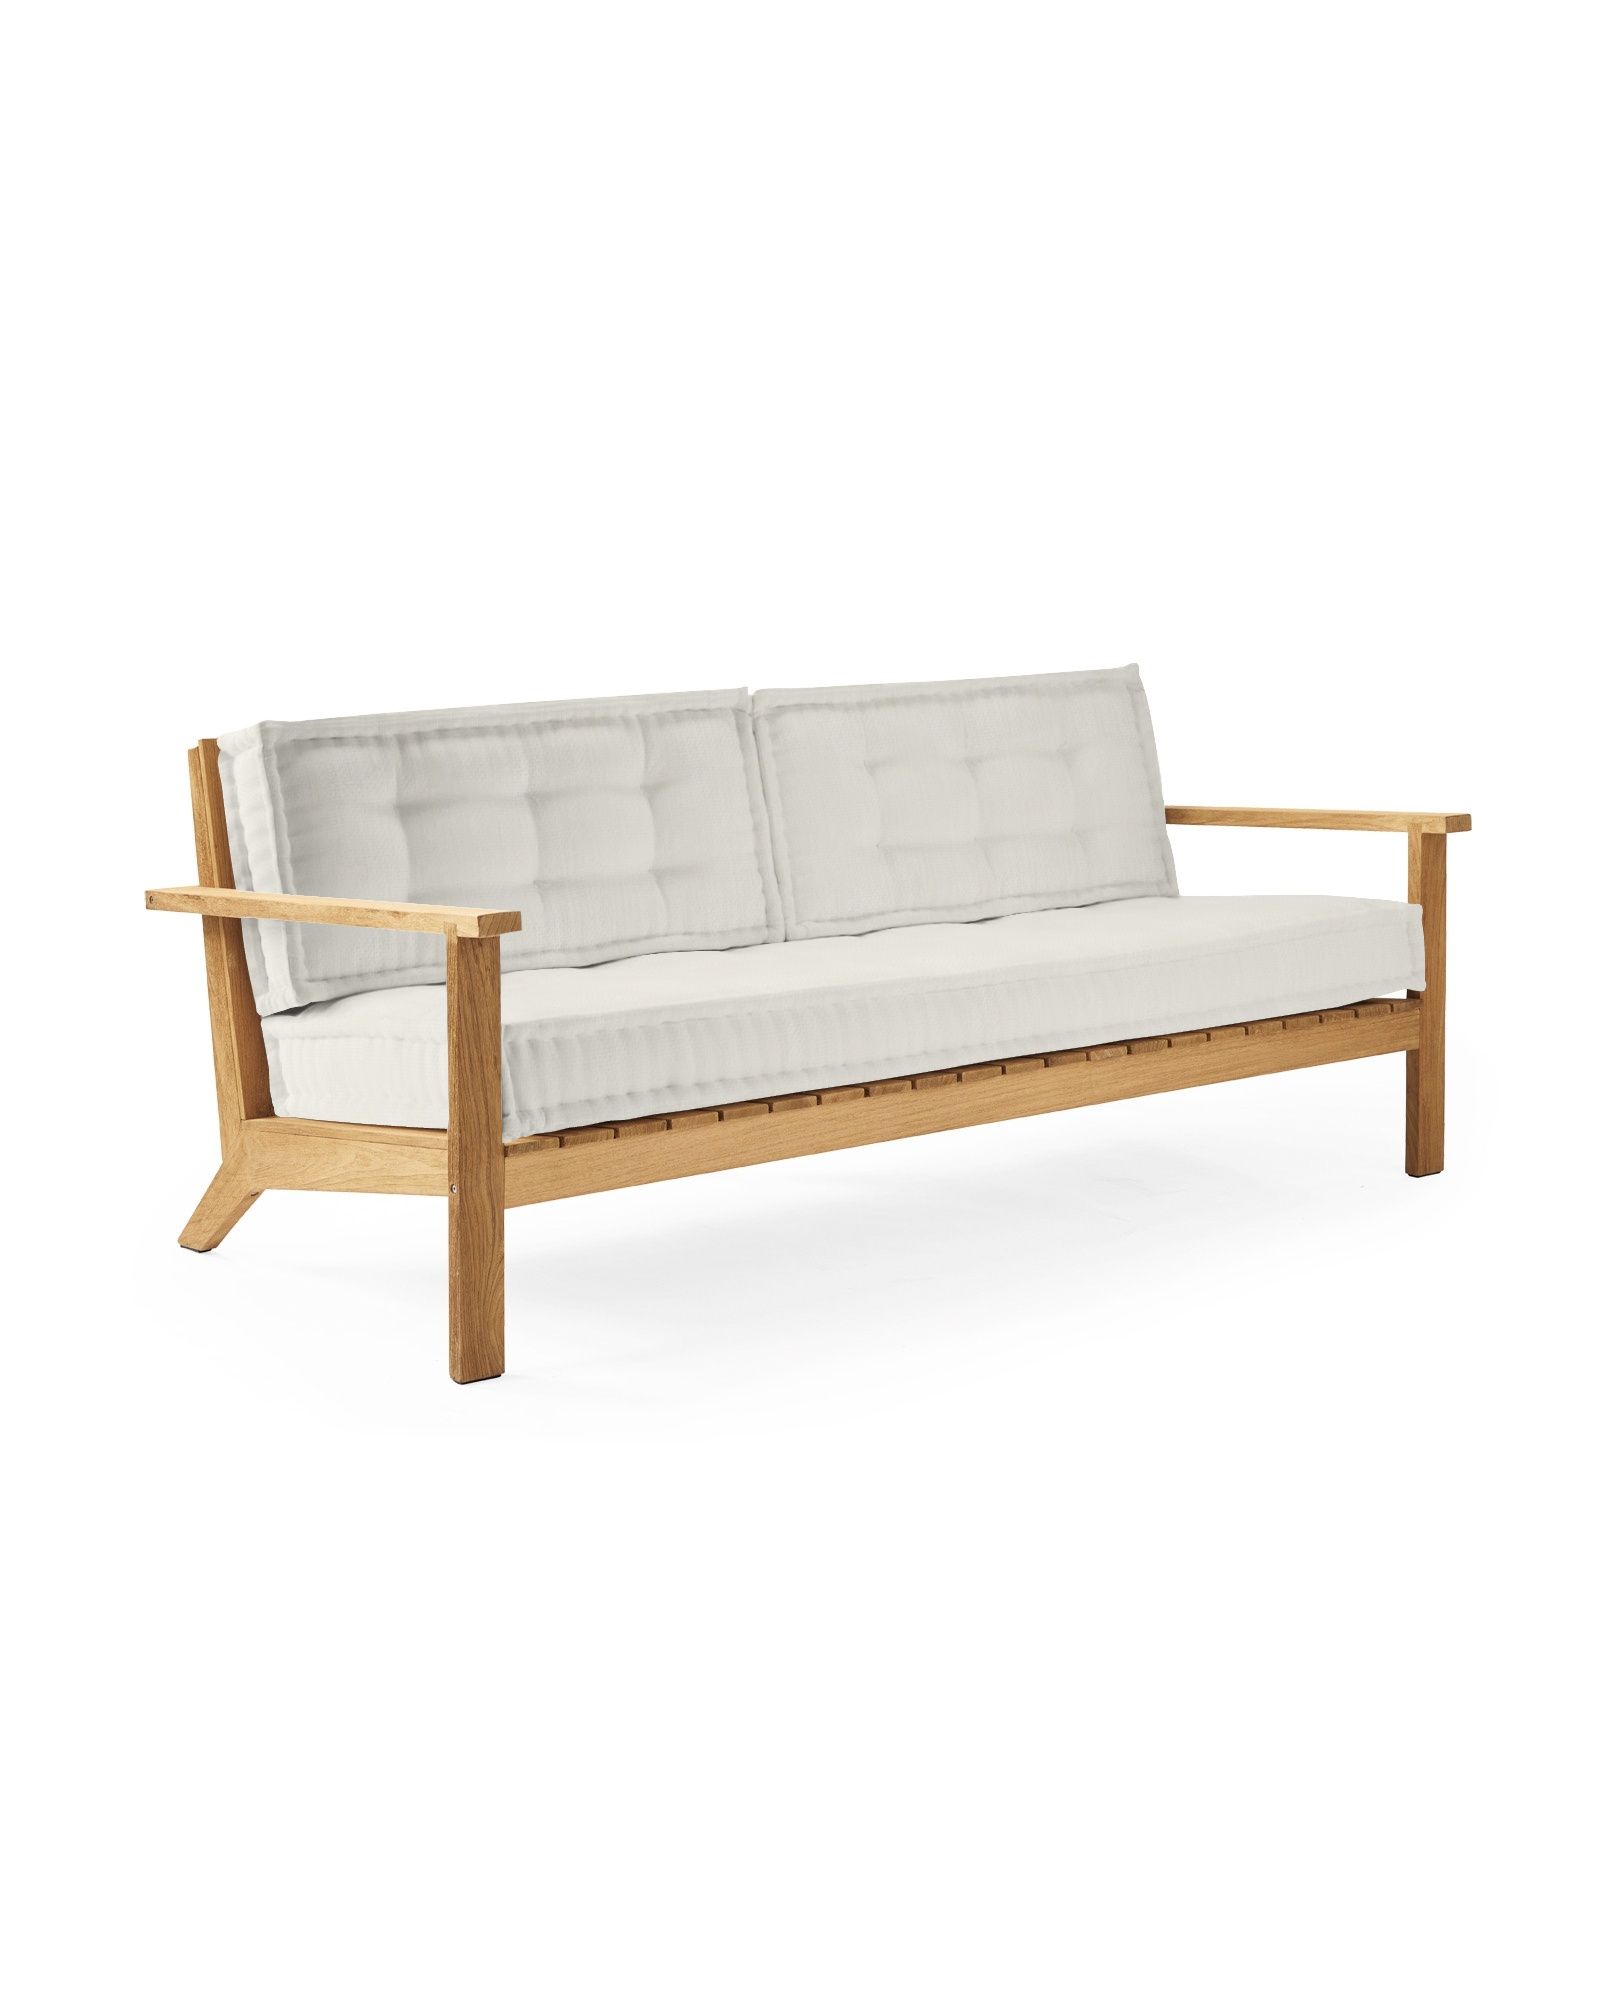 Cliffside Teak Sofa | Serena and Lily